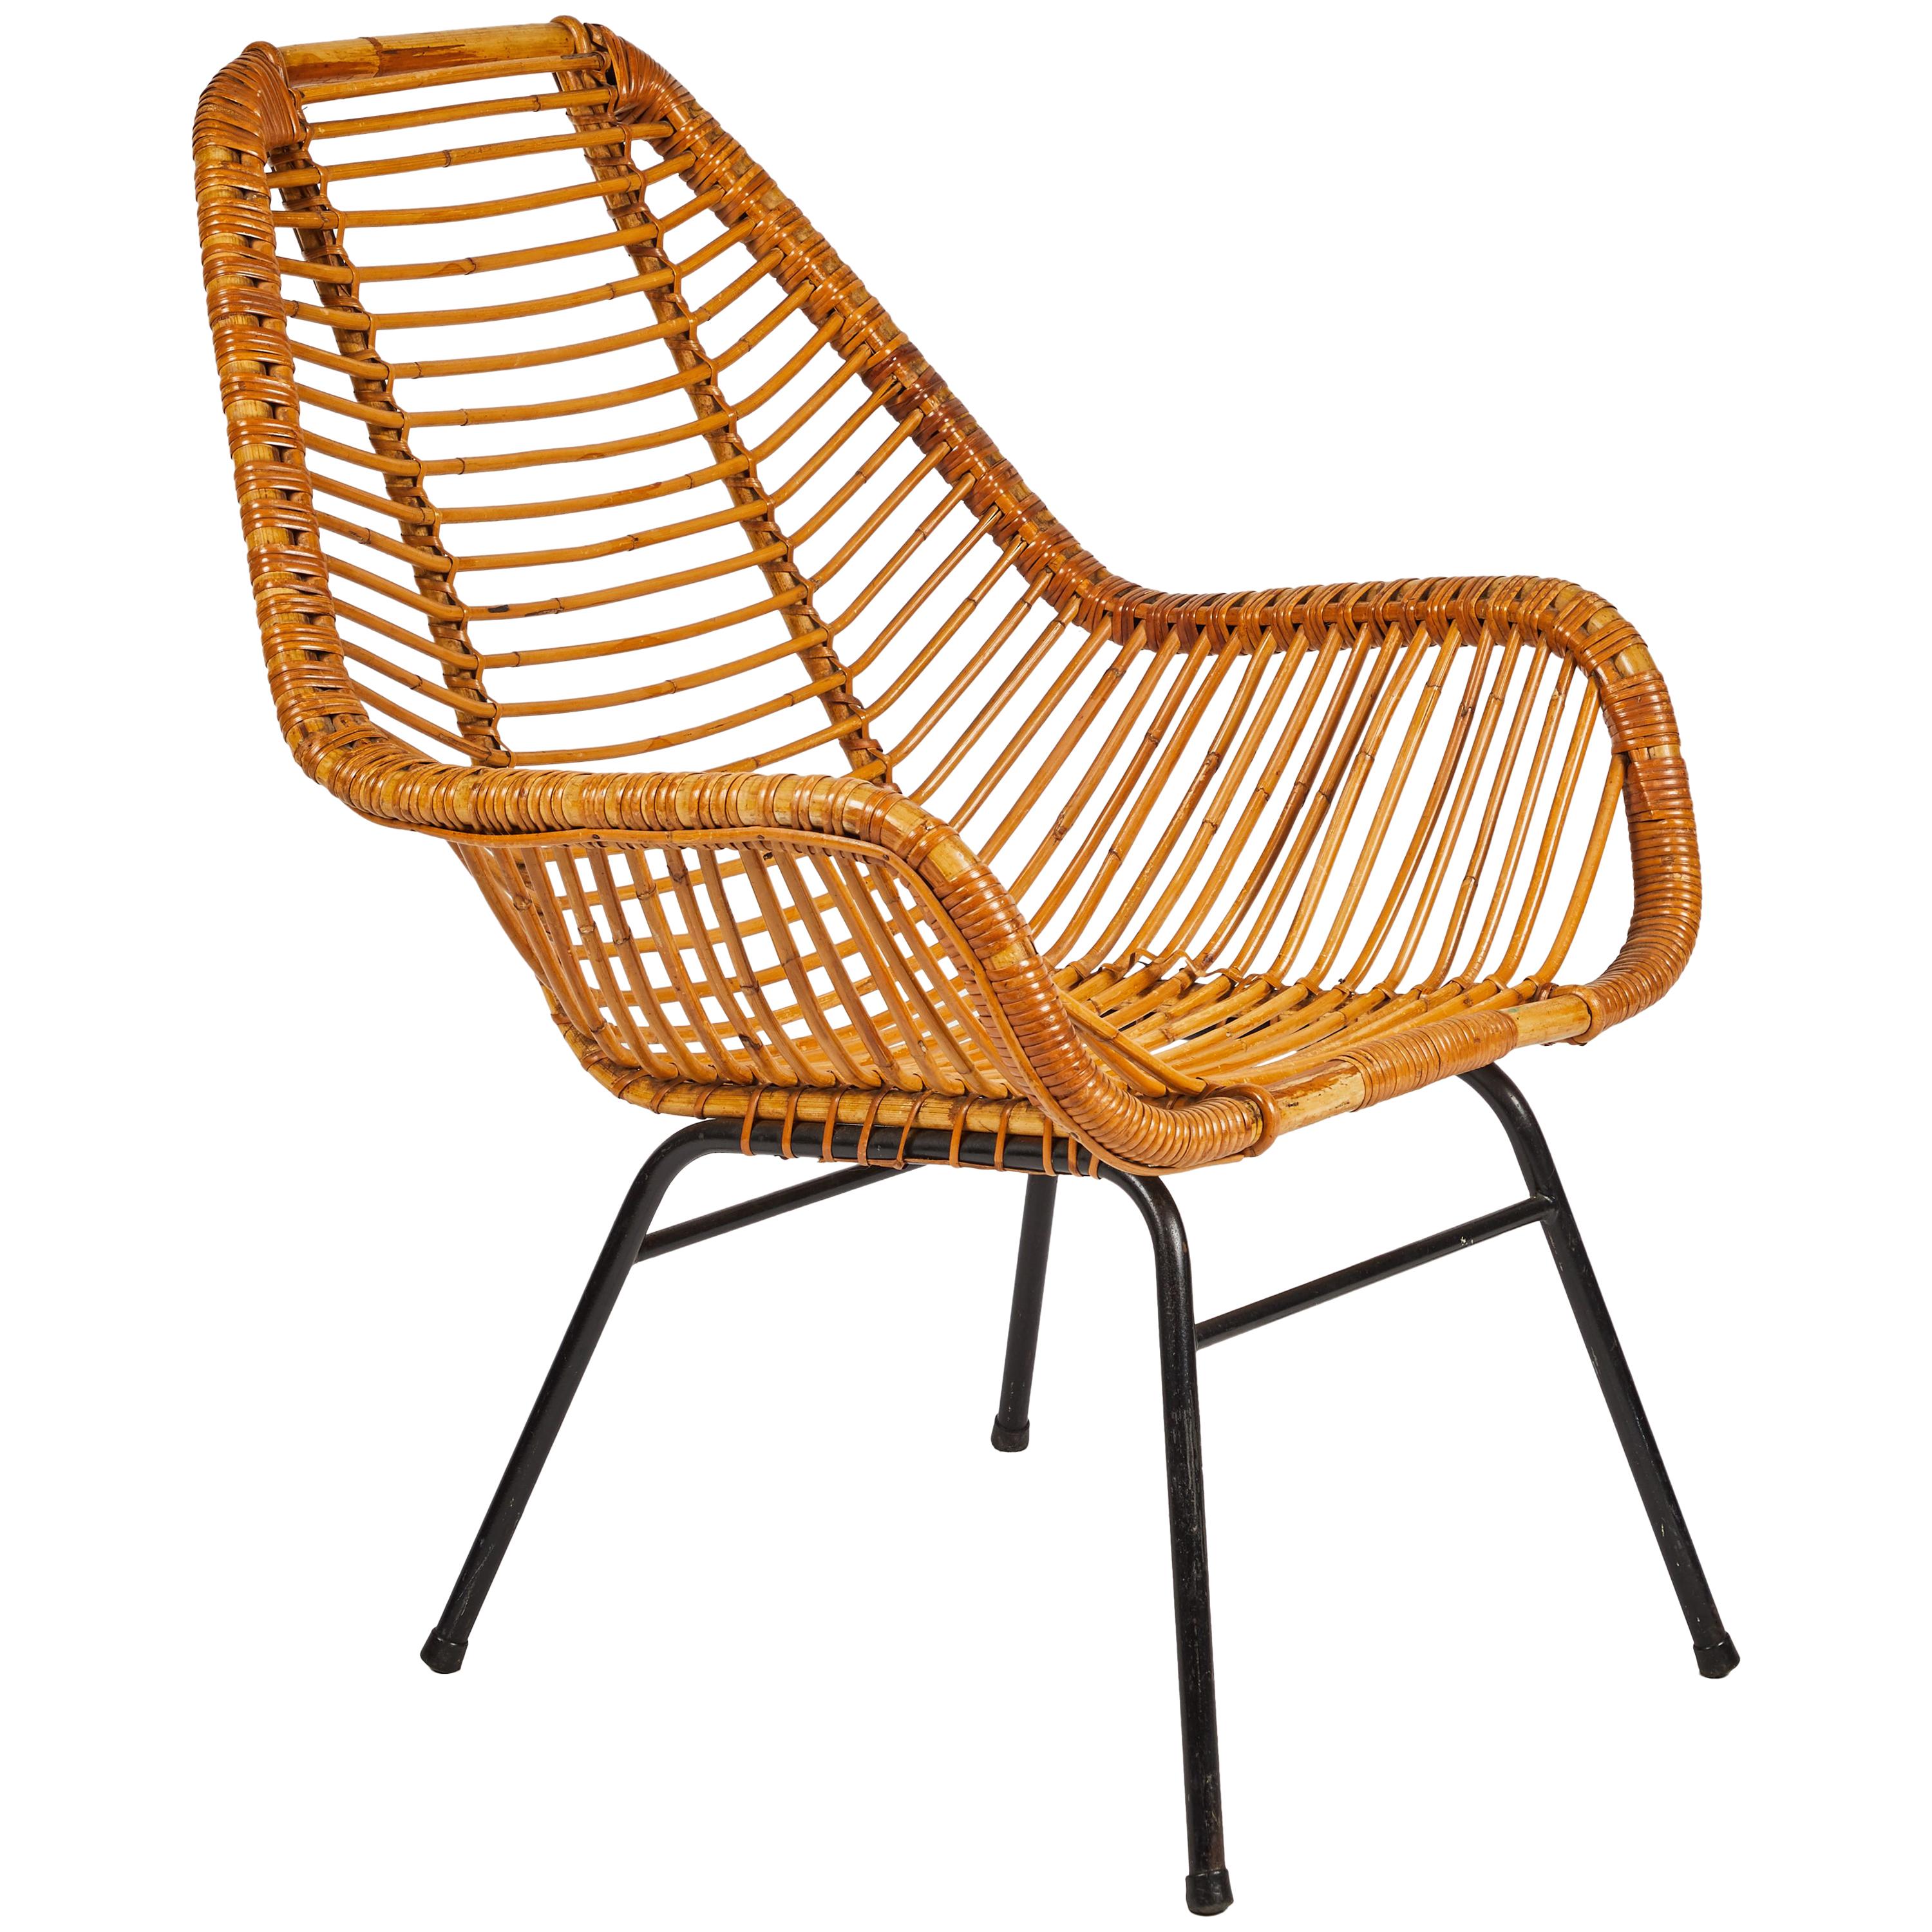 French mid-century rattan armchair with metal base. Warm and beachy, or sleek and modern, this versatile piece invites you to relax. The simple repetition of lines and soft curves gives this classic chair its sex appeal. 

France, circa